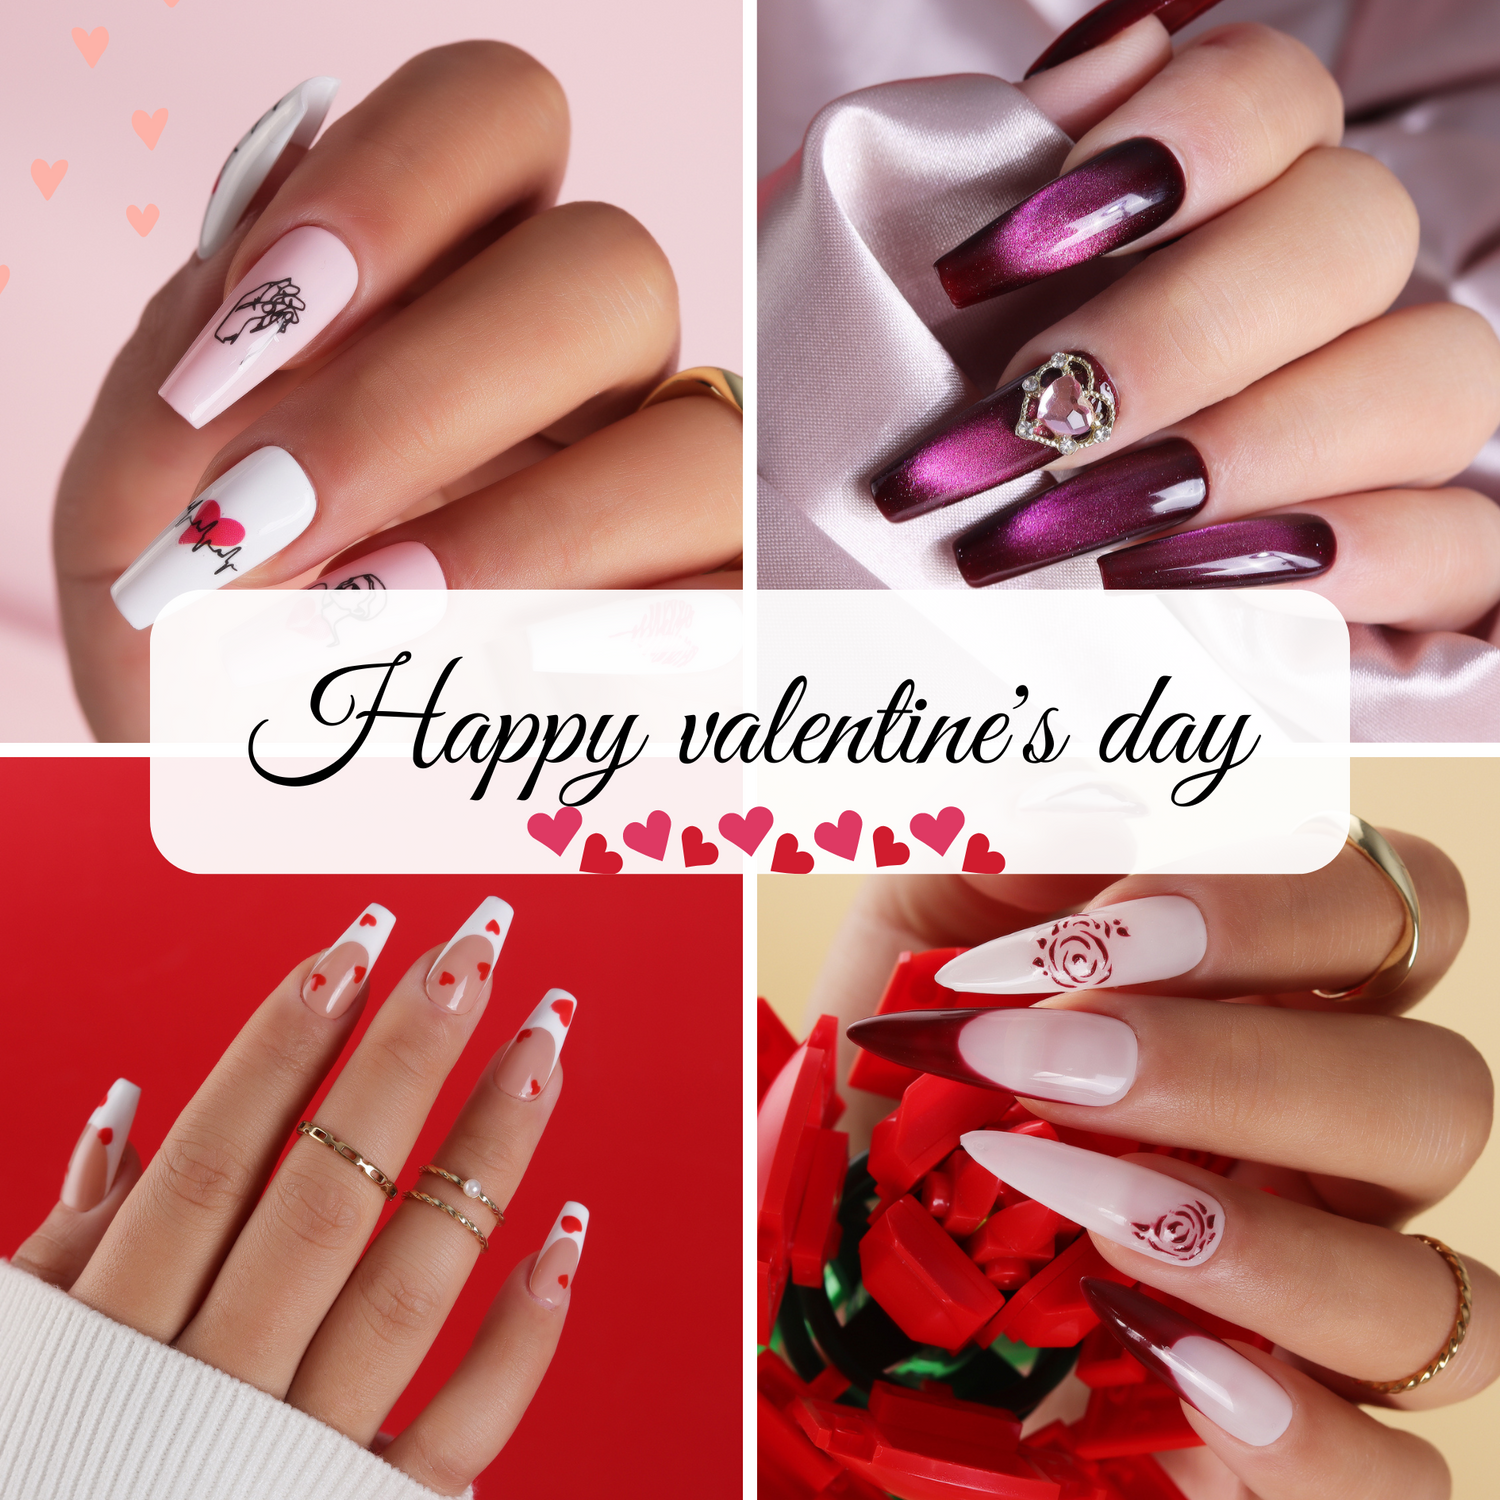 12 Lovely Valentine's Day Nails You'll Absolutely Adore